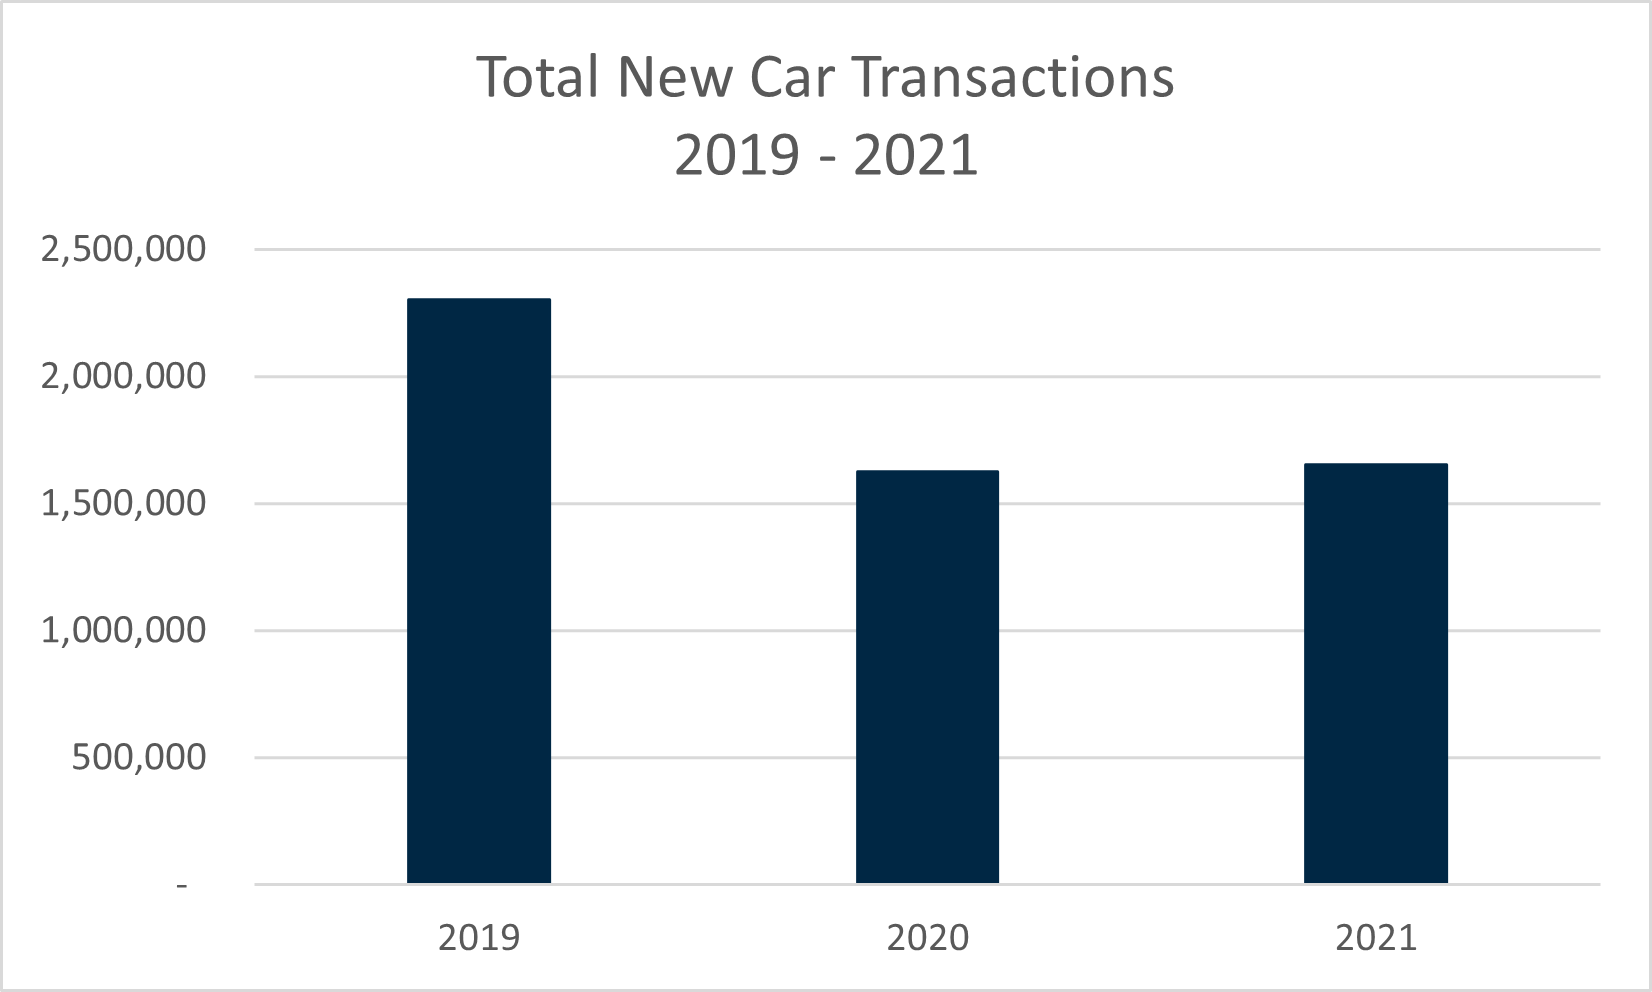 The total variation in New Car Transactions between 2019 and 2021 using the DVLA car registrations data